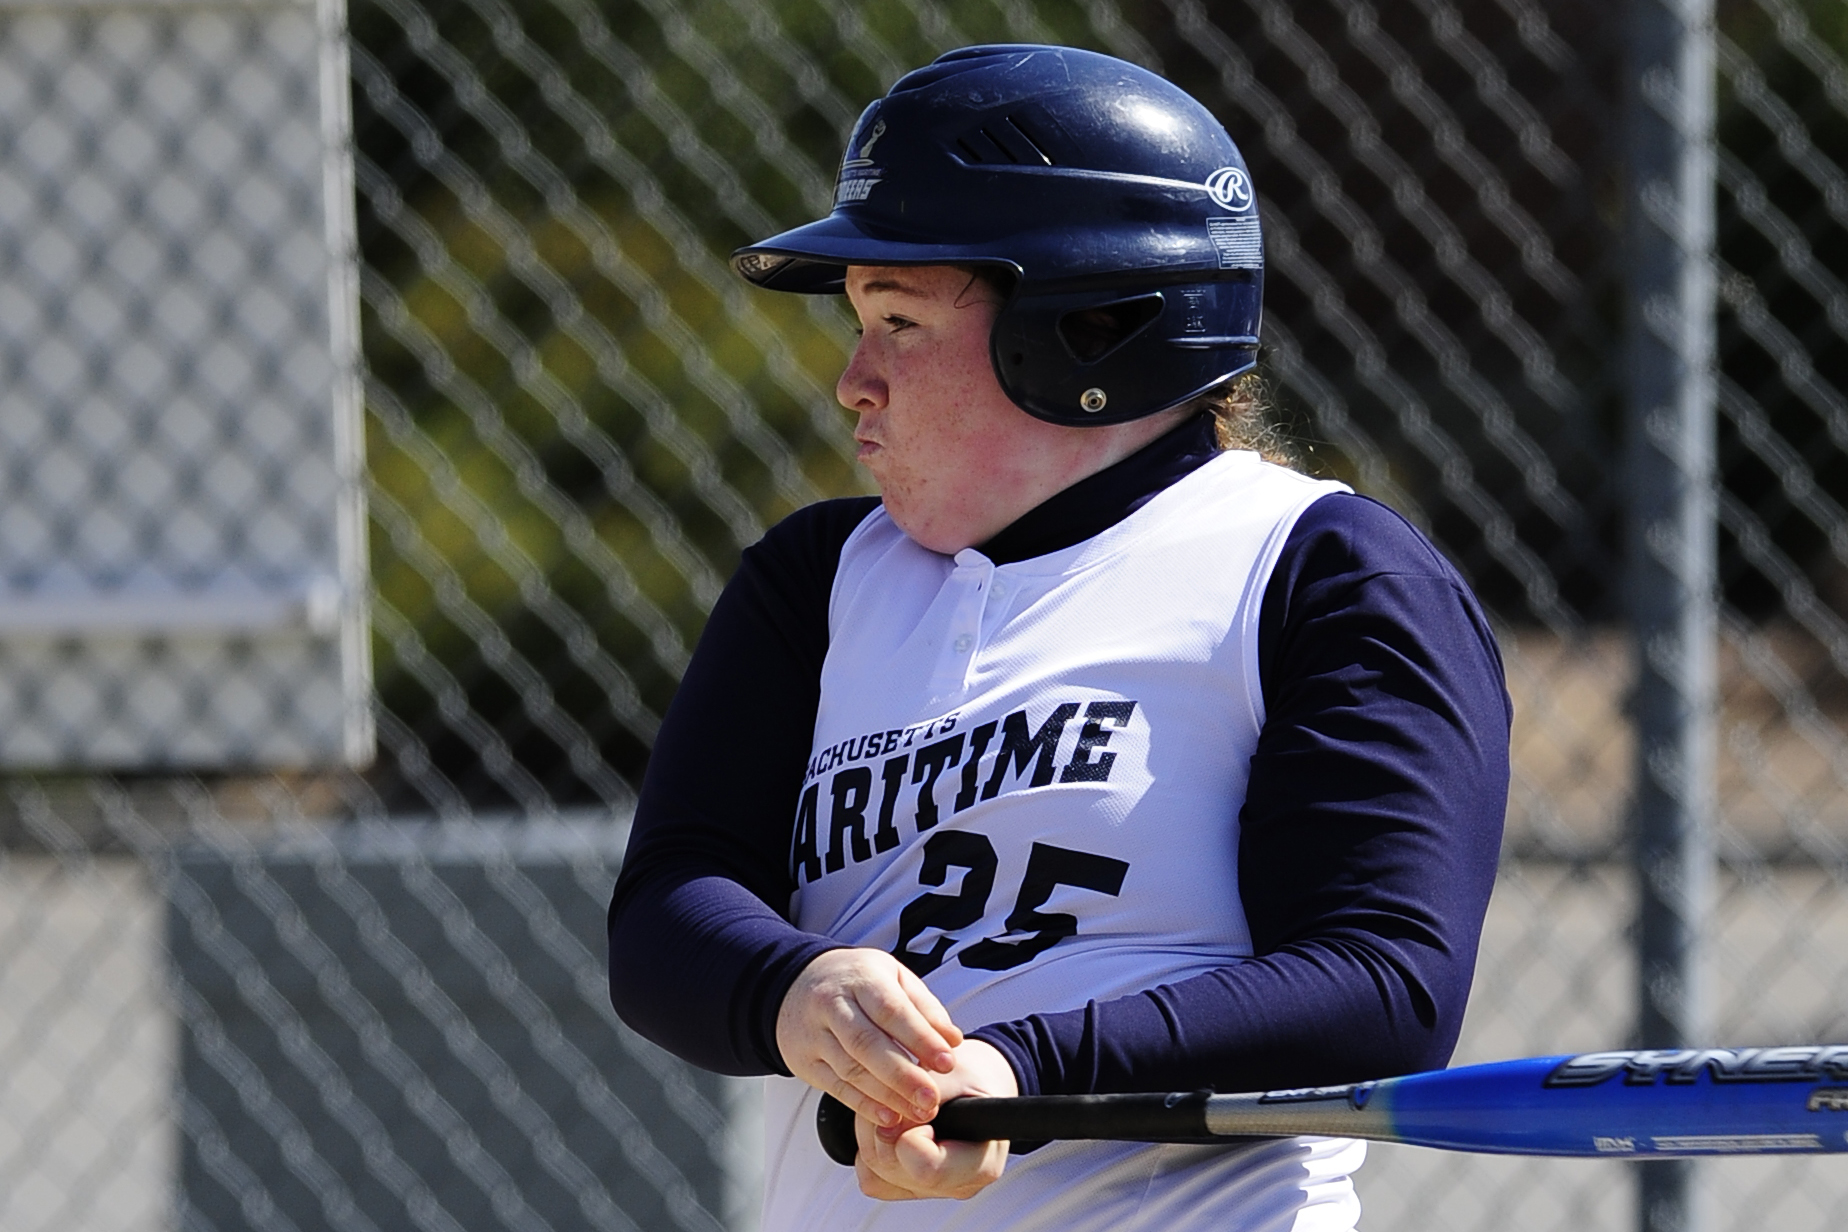 Thibeault Raps Out Three Hits As Softball Drops MASCAC Opening Doubleheader To MCLA